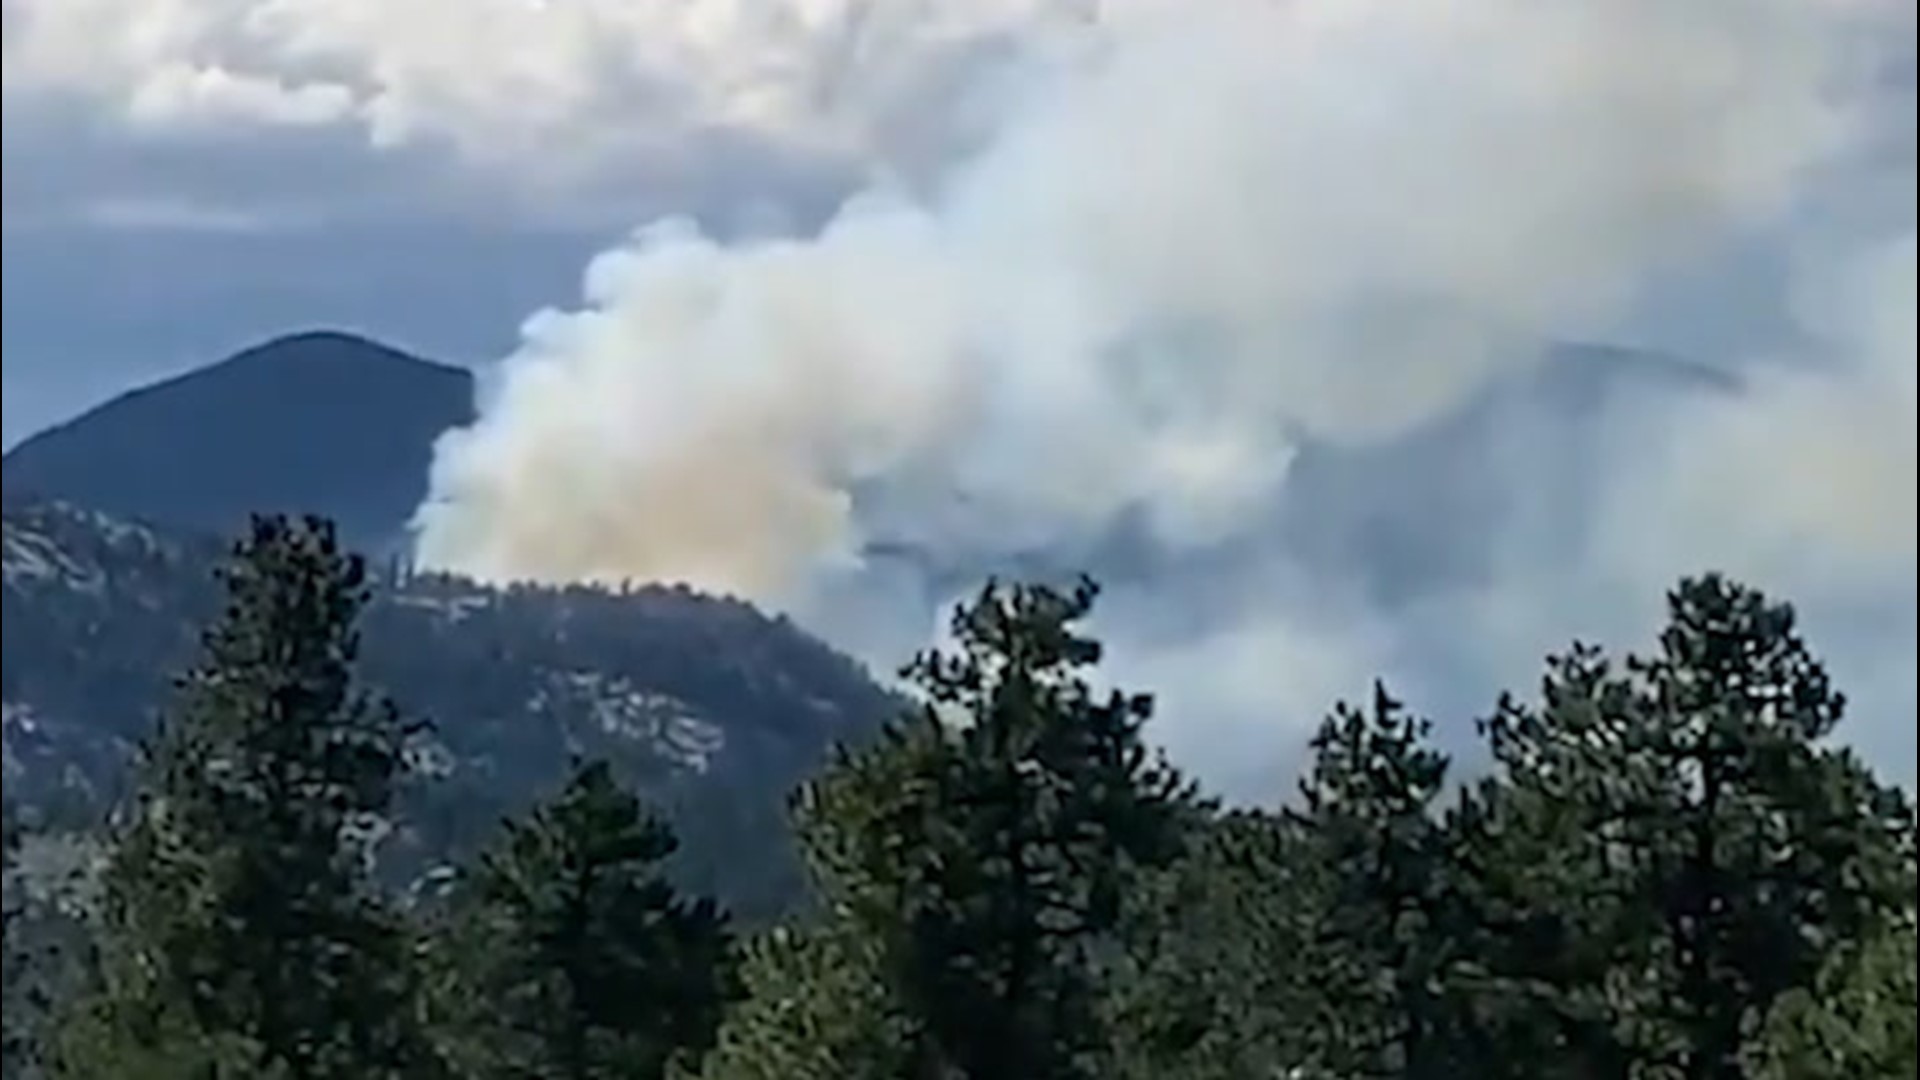 As the Elephant Butte Fire grew on Monday afternoon, July 13, the Sheriff's Office in Jefferson County, Colorado, placed an evacuation order for 700 homes.